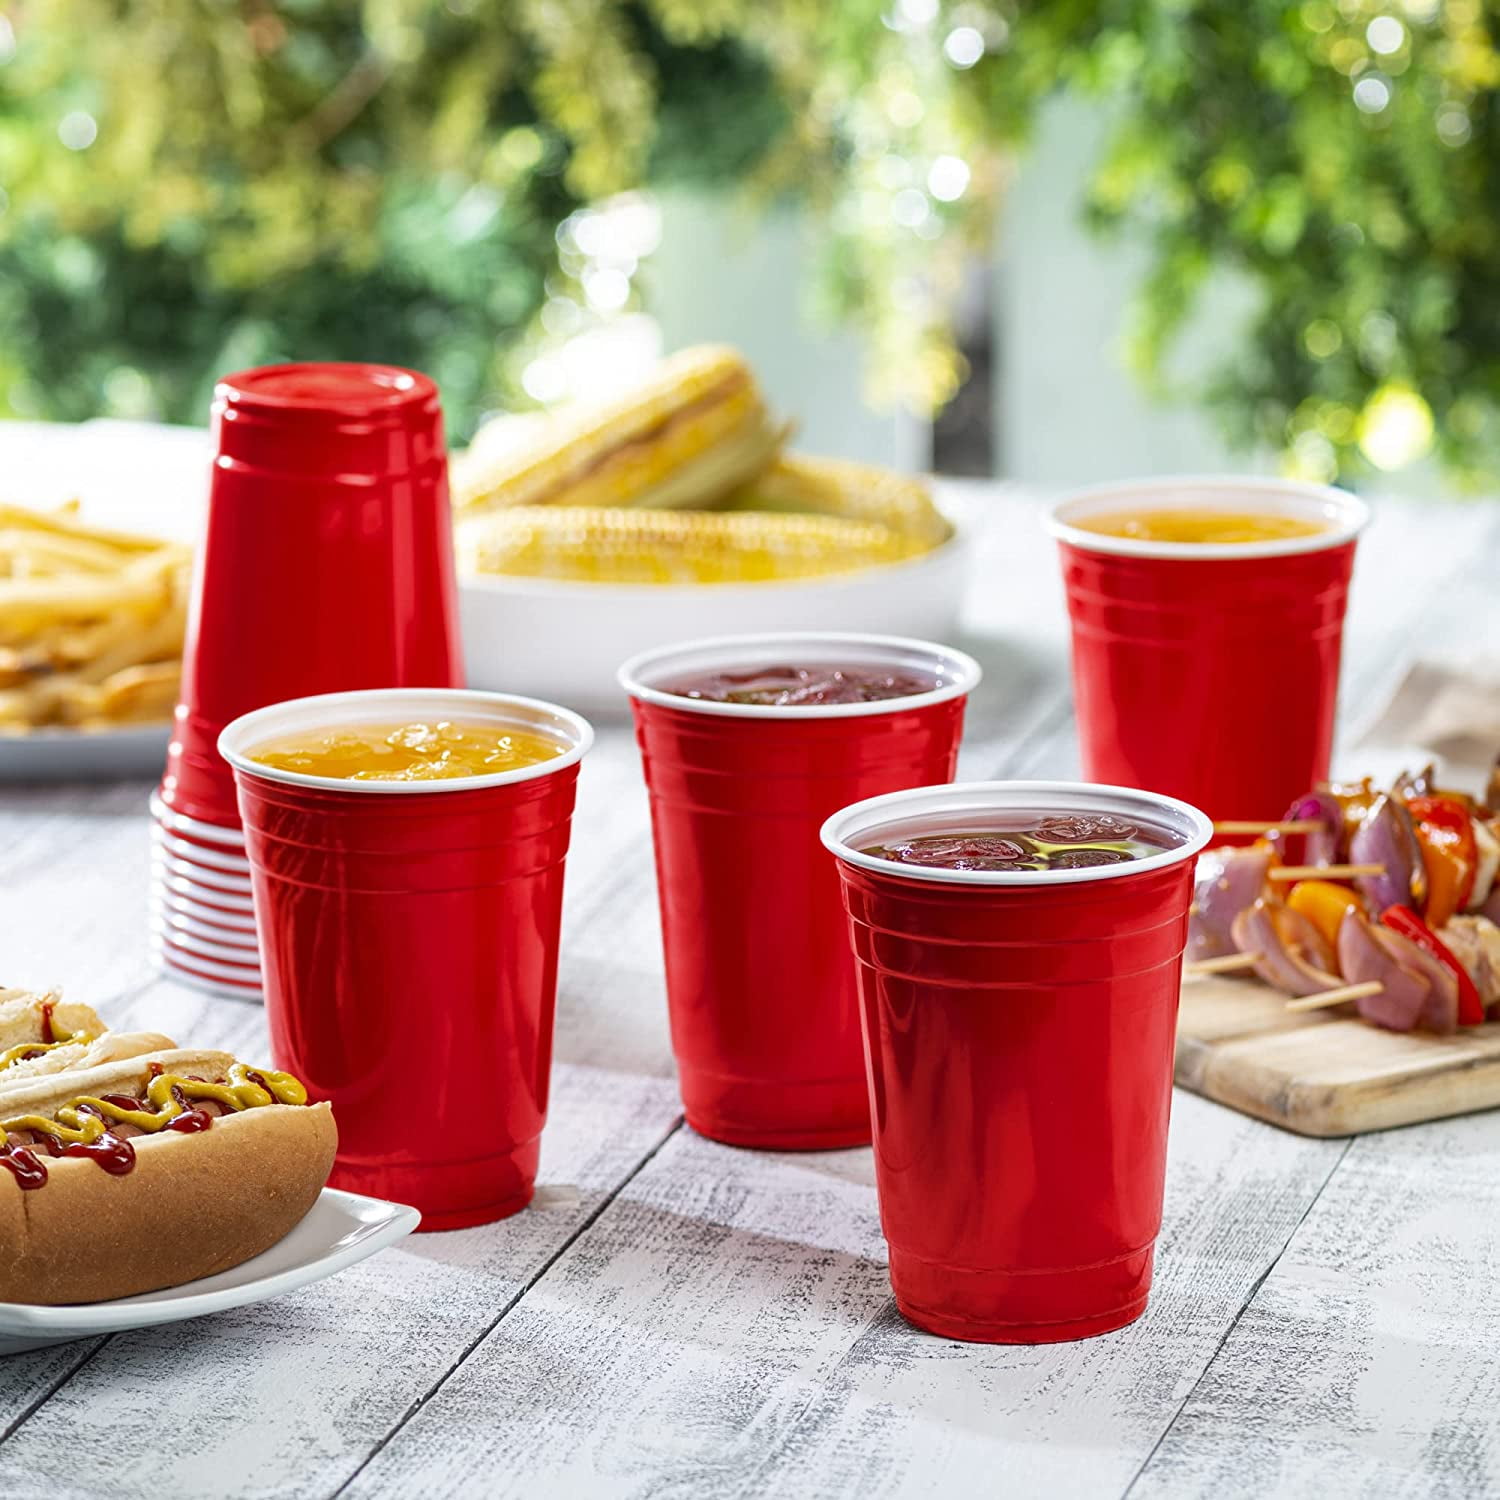 Solo Disposable Plastic Cups, Red, 18oz, 50 Count